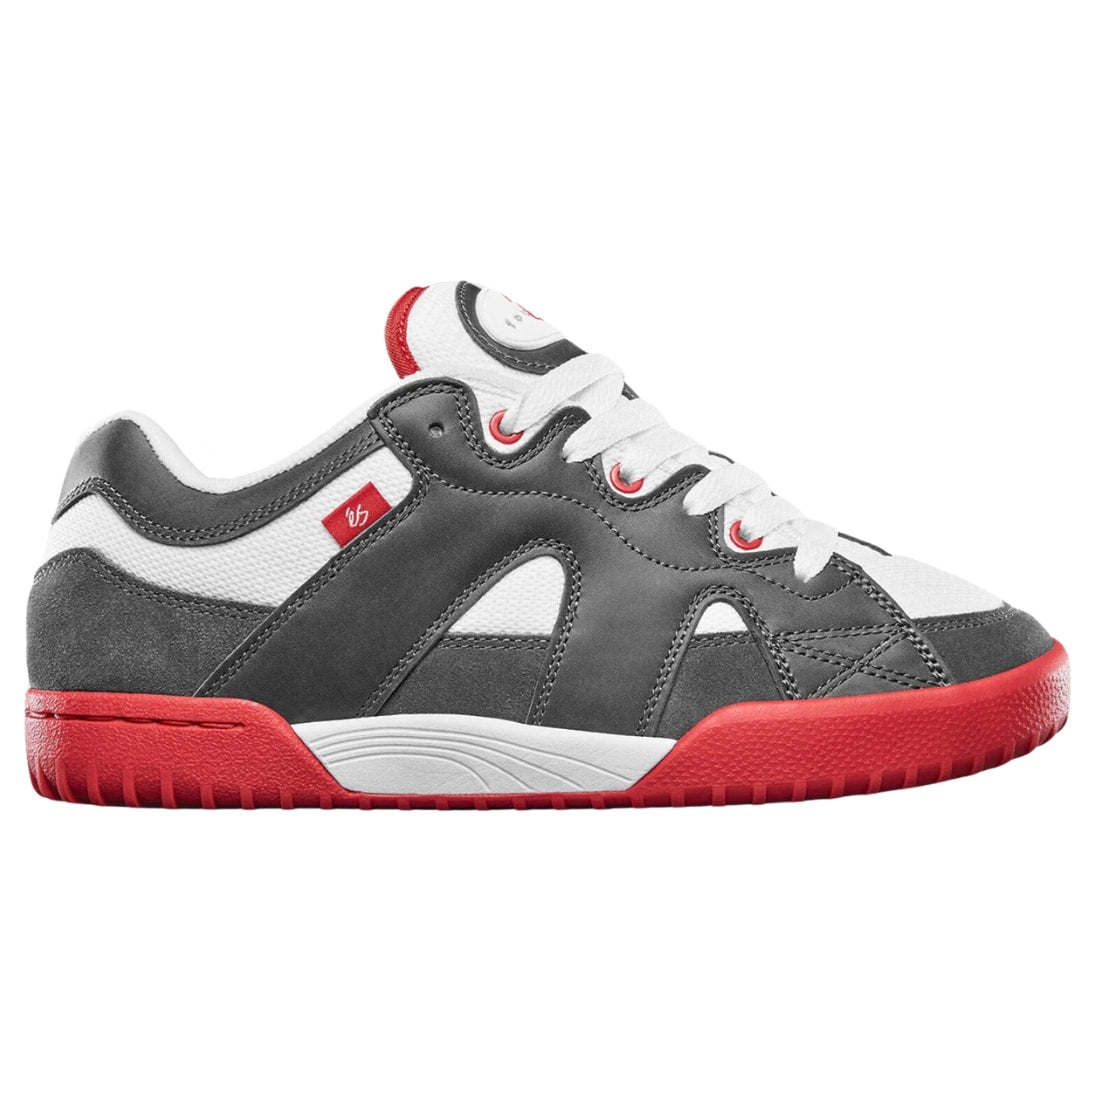 eS One Nine 7 Skate Shoes - Grey/White/Red